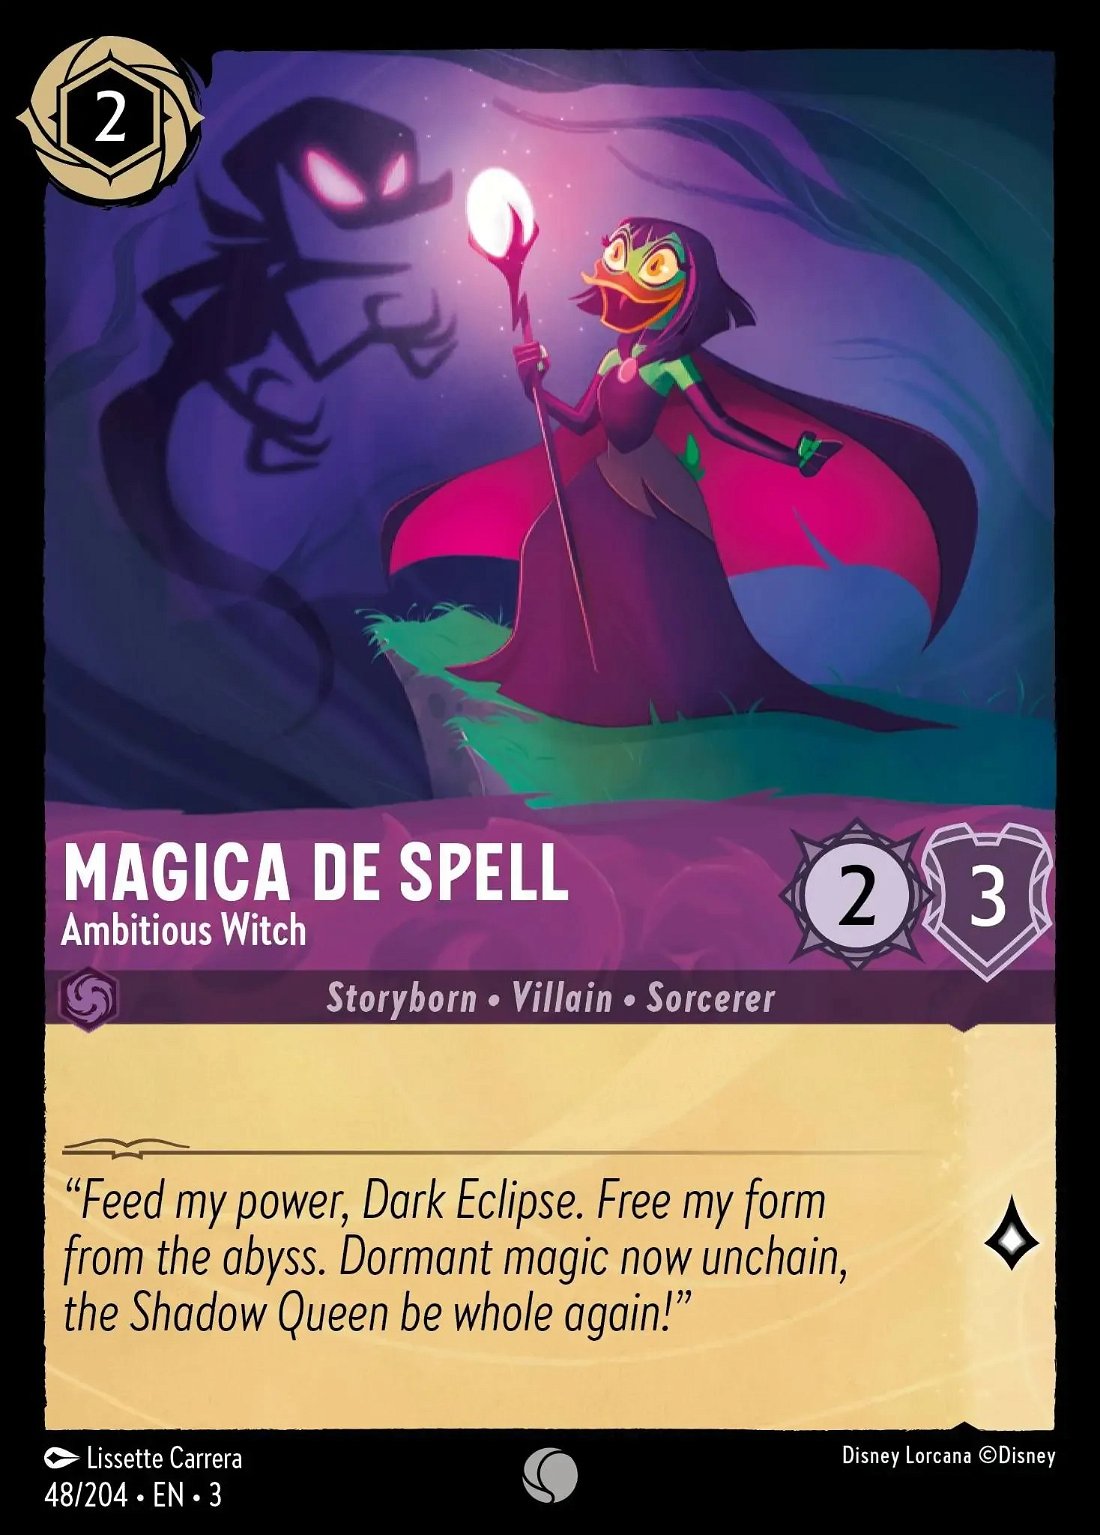 Magica De Spell - Ambitious Witch Crop image Wallpaper